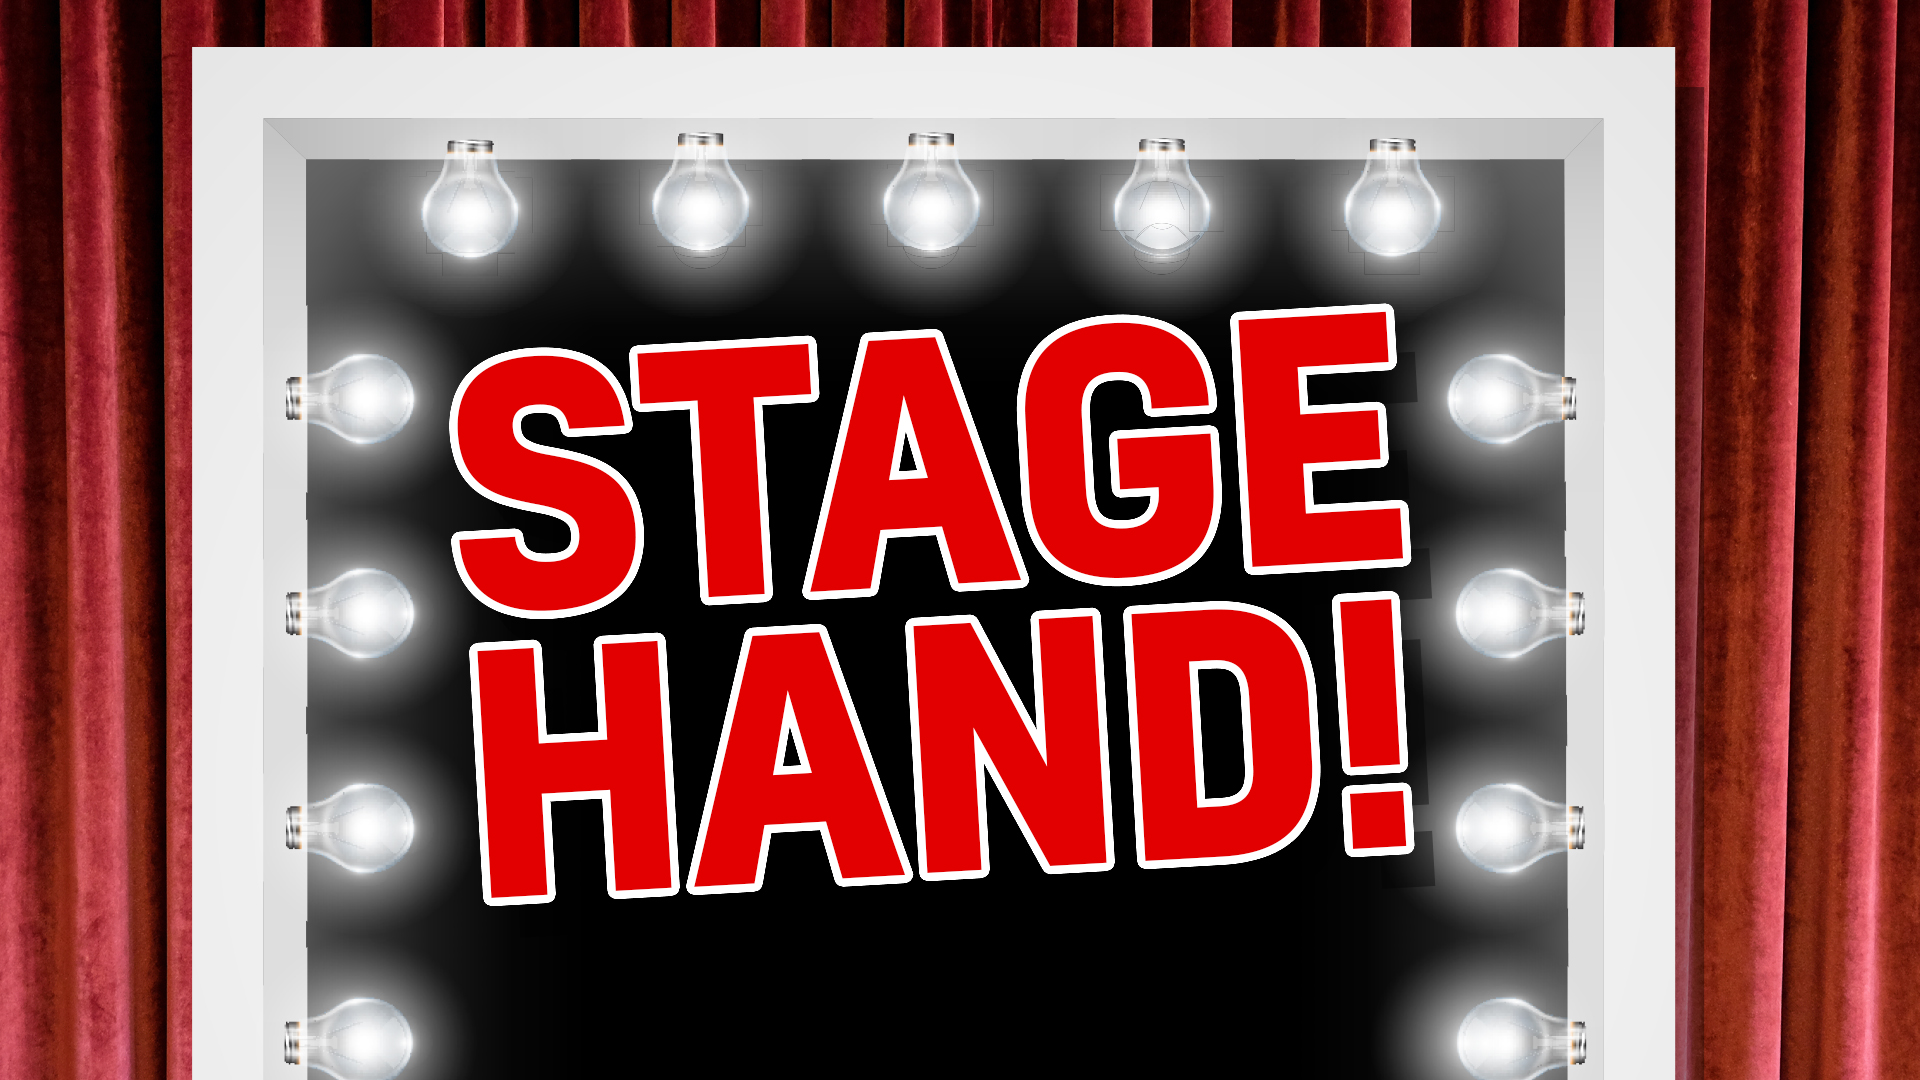 Stage hand